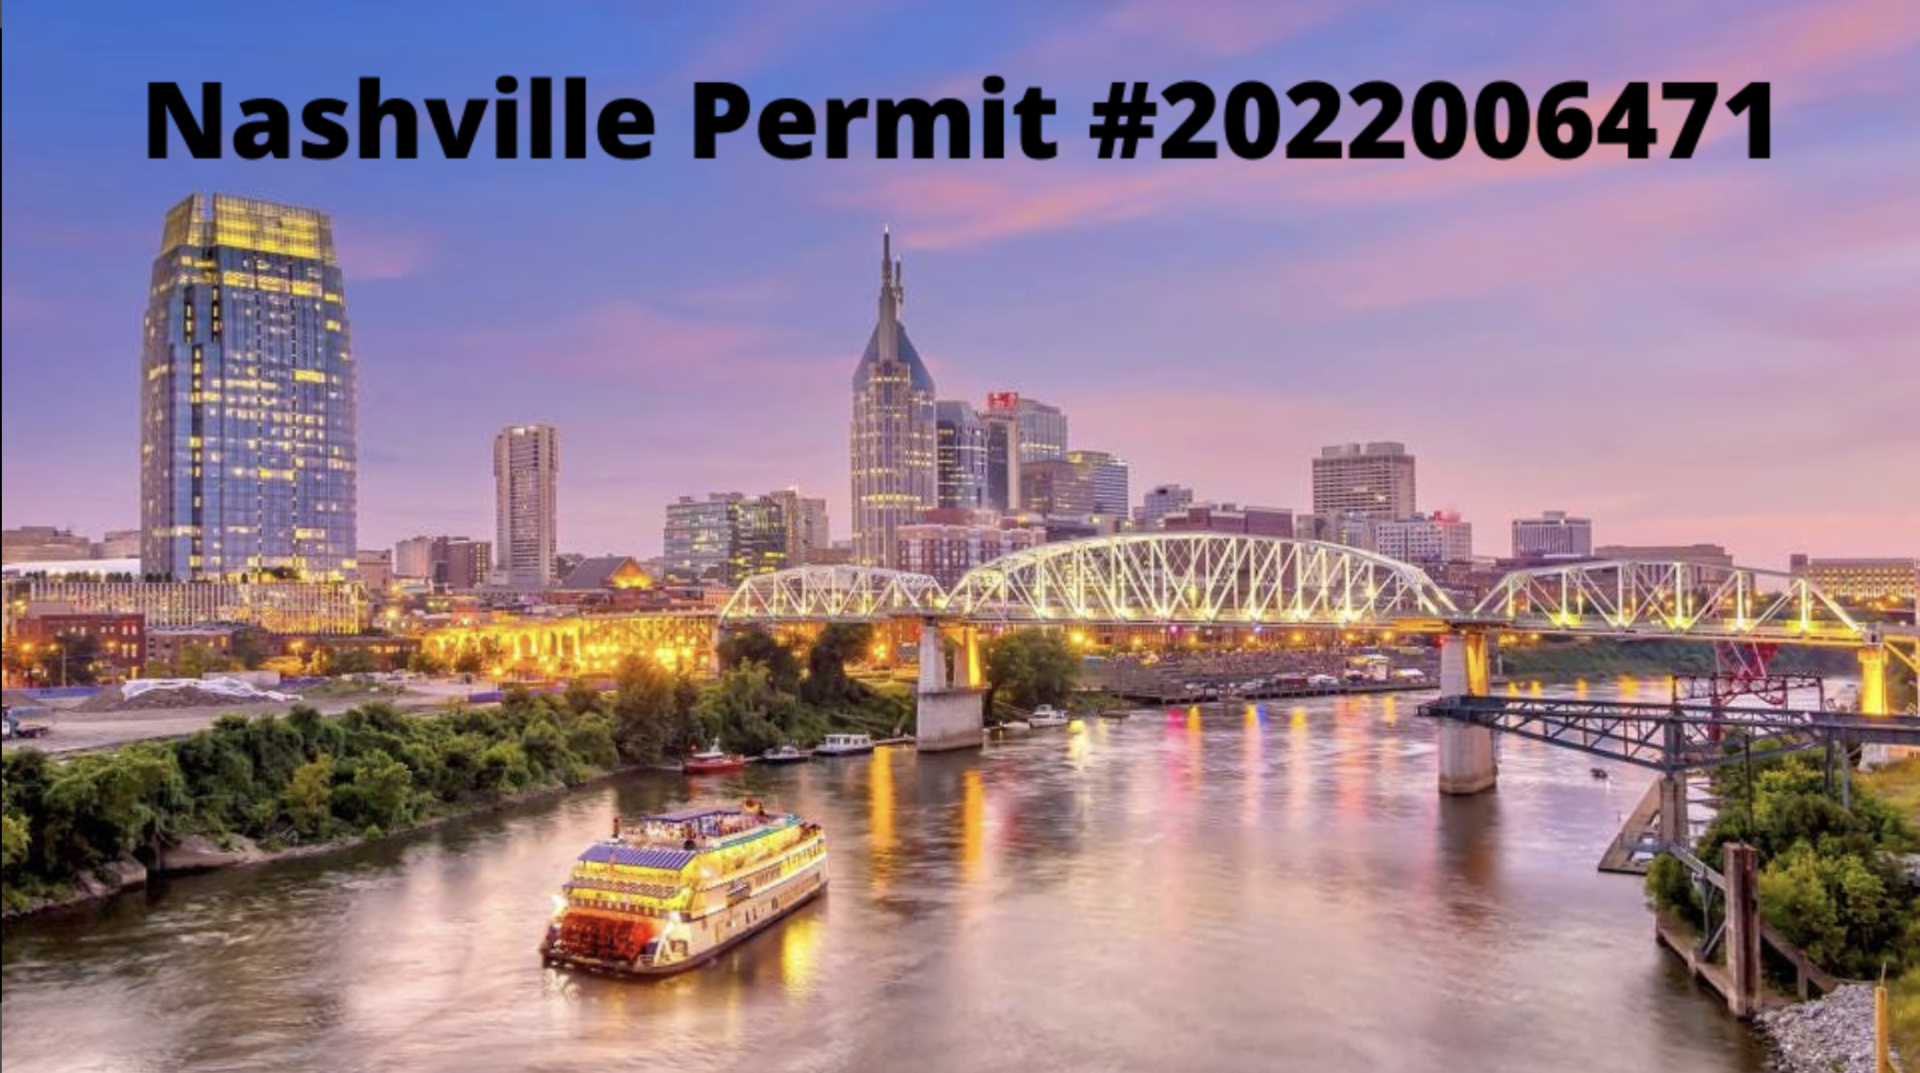 Nashville Permit for 4th Unit: issued in 2022 followed by:2022006471